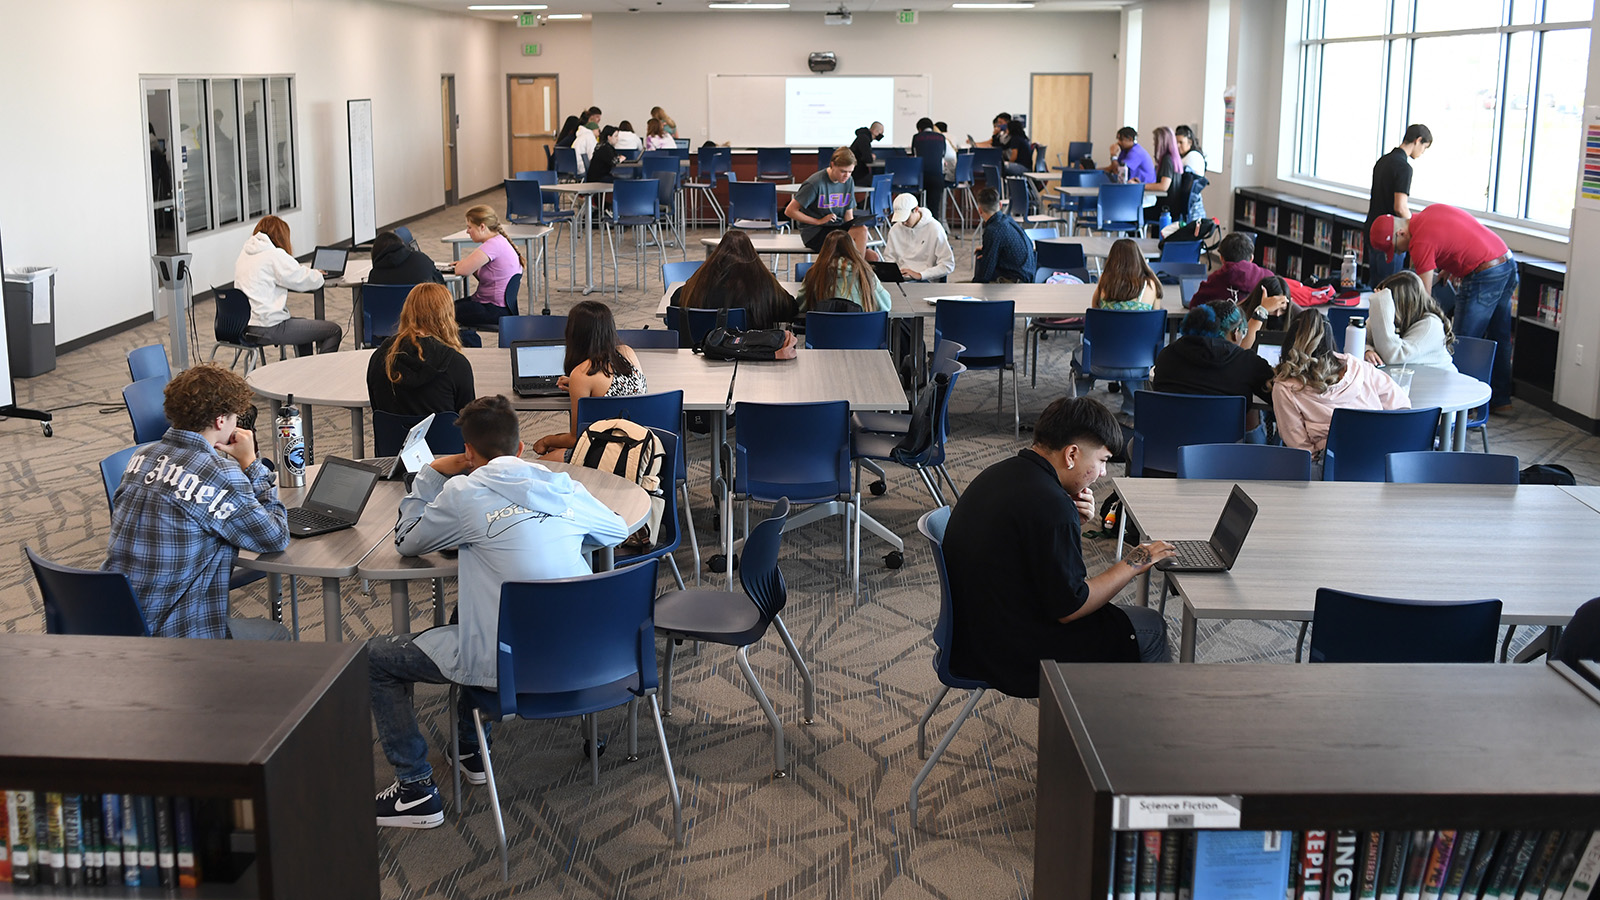 Student work during advisory period at Riverdale Ridge High School on Aug. 12, 2021 in Thornton.